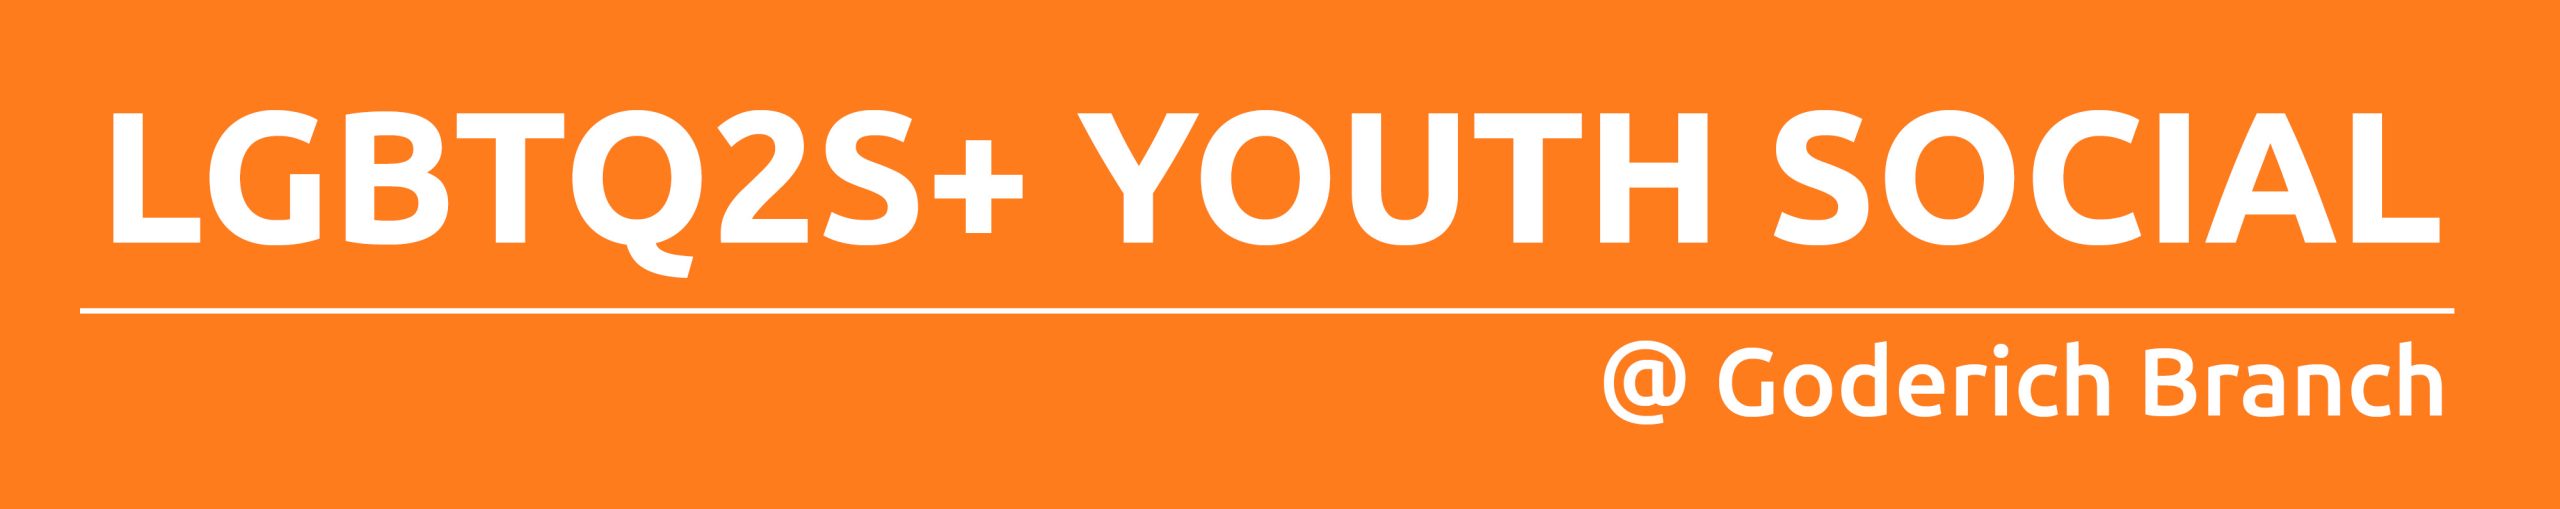 Dark orange rectangle with text promoting LGBTQ2S+ Youth Social Connections at Goderich